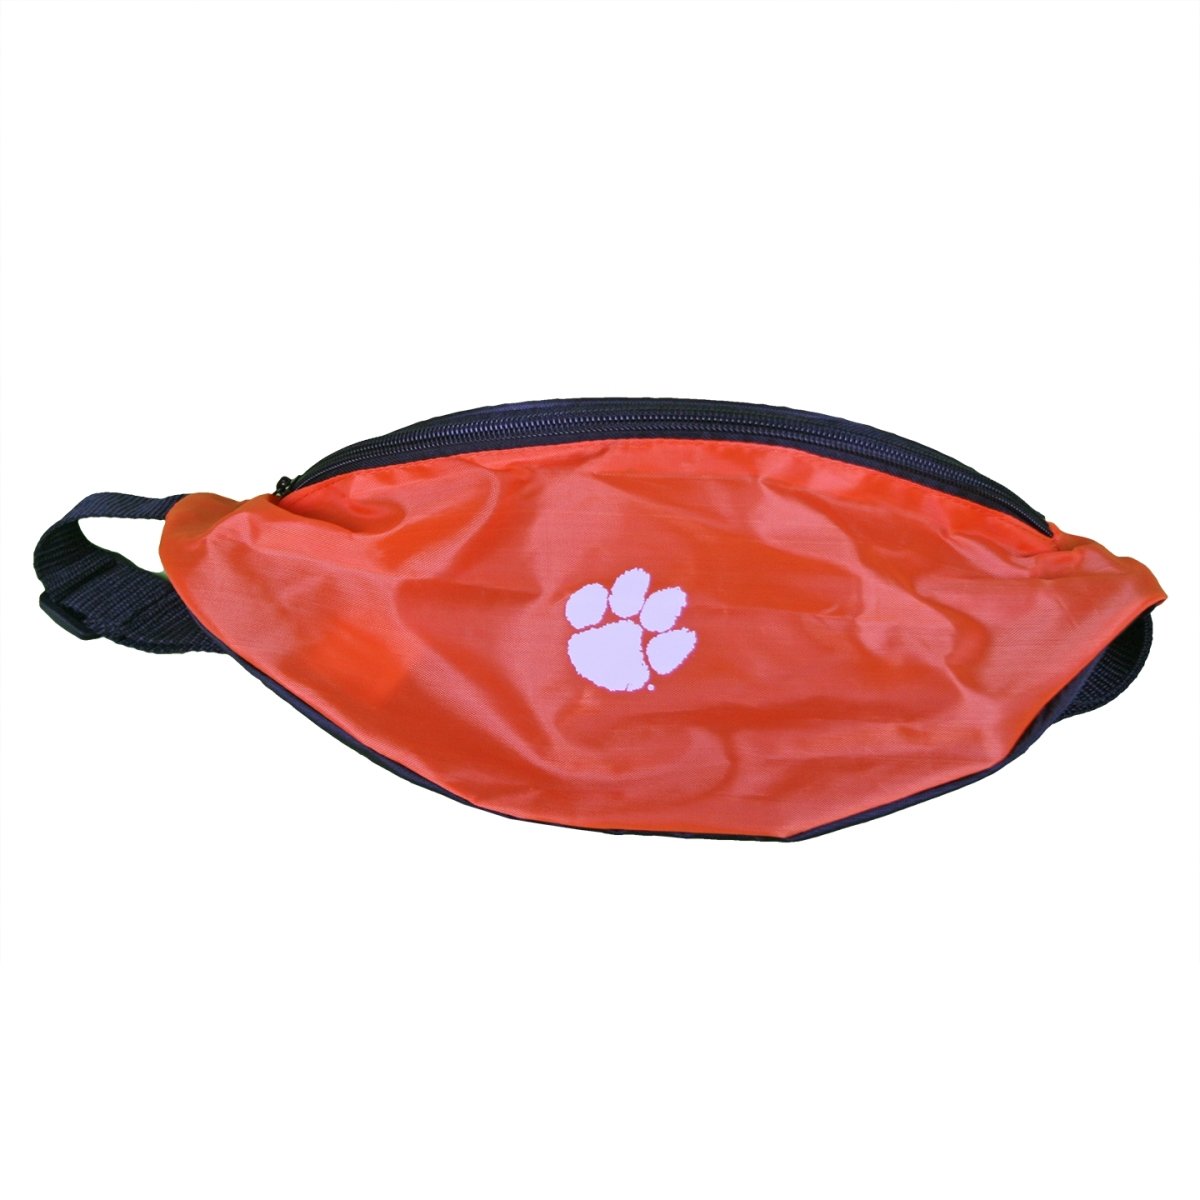 Fanny Pack With White Paw - Mr. Knickerbocker